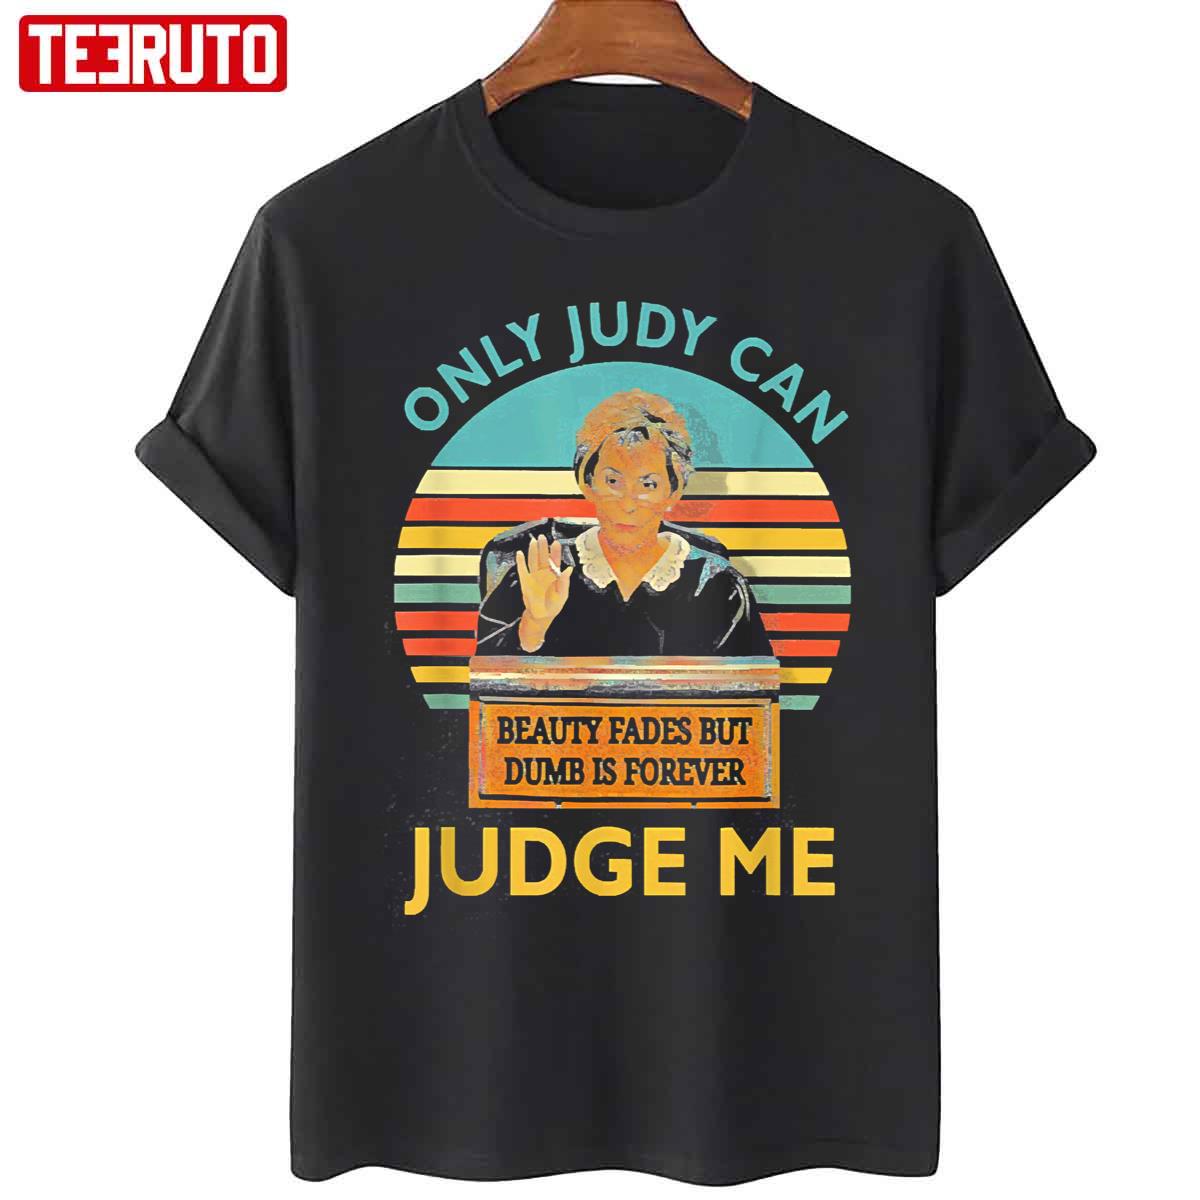 Only Judy Can Judge Me Vintage Unisex T-Shirt